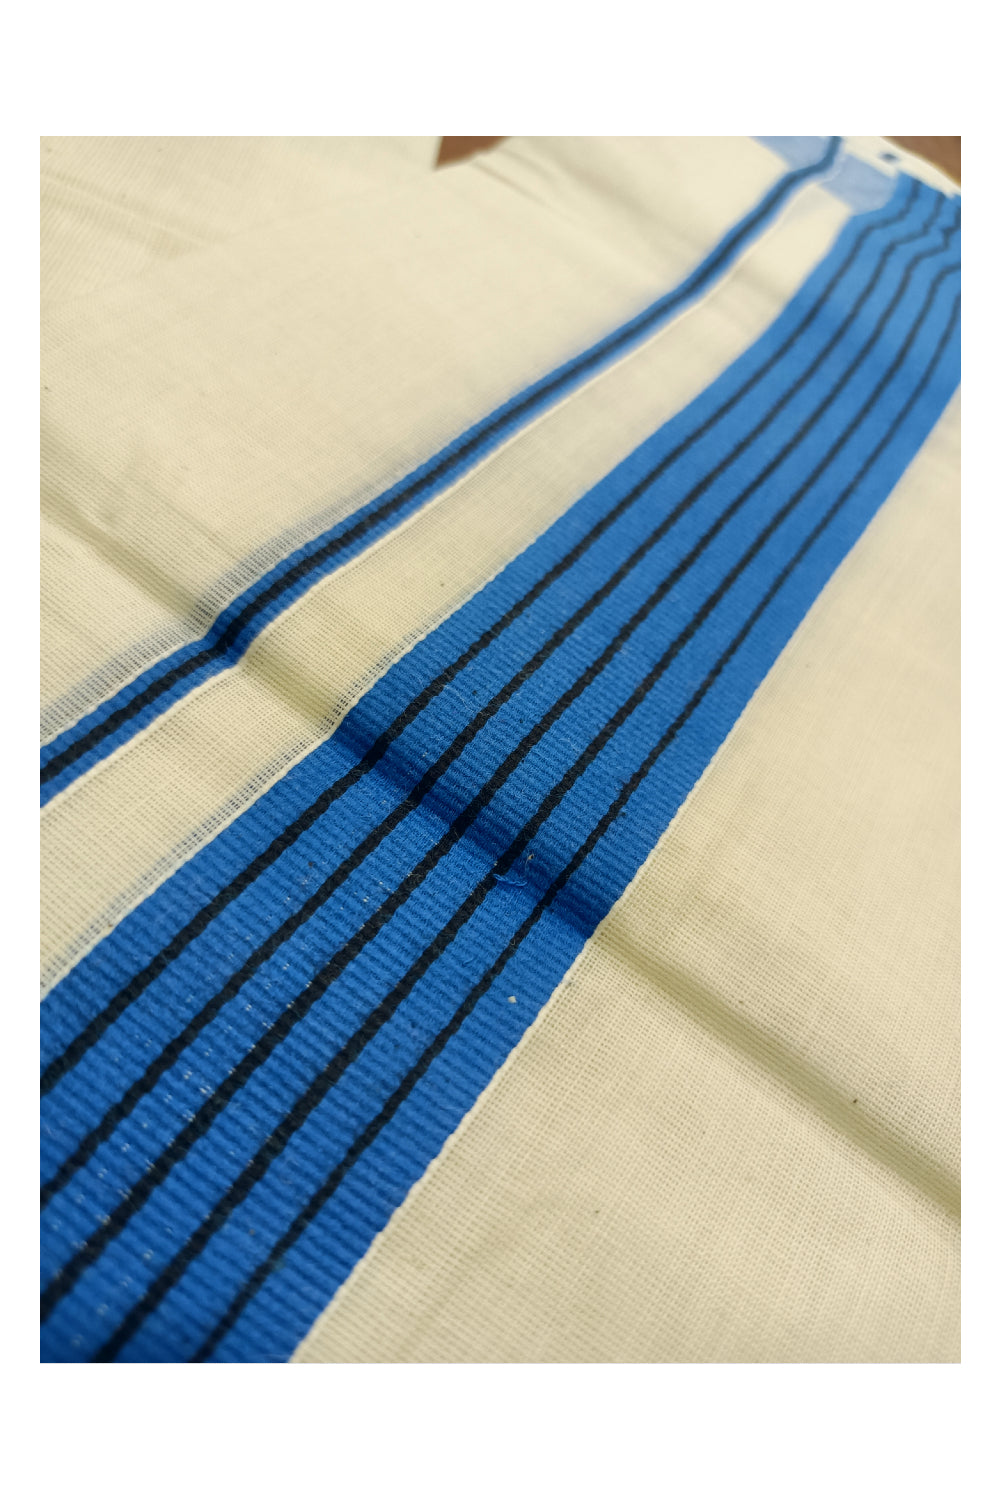 Off White Kerala Double Mundu with Black Lines on Blue Border (South Indian Dhoti)